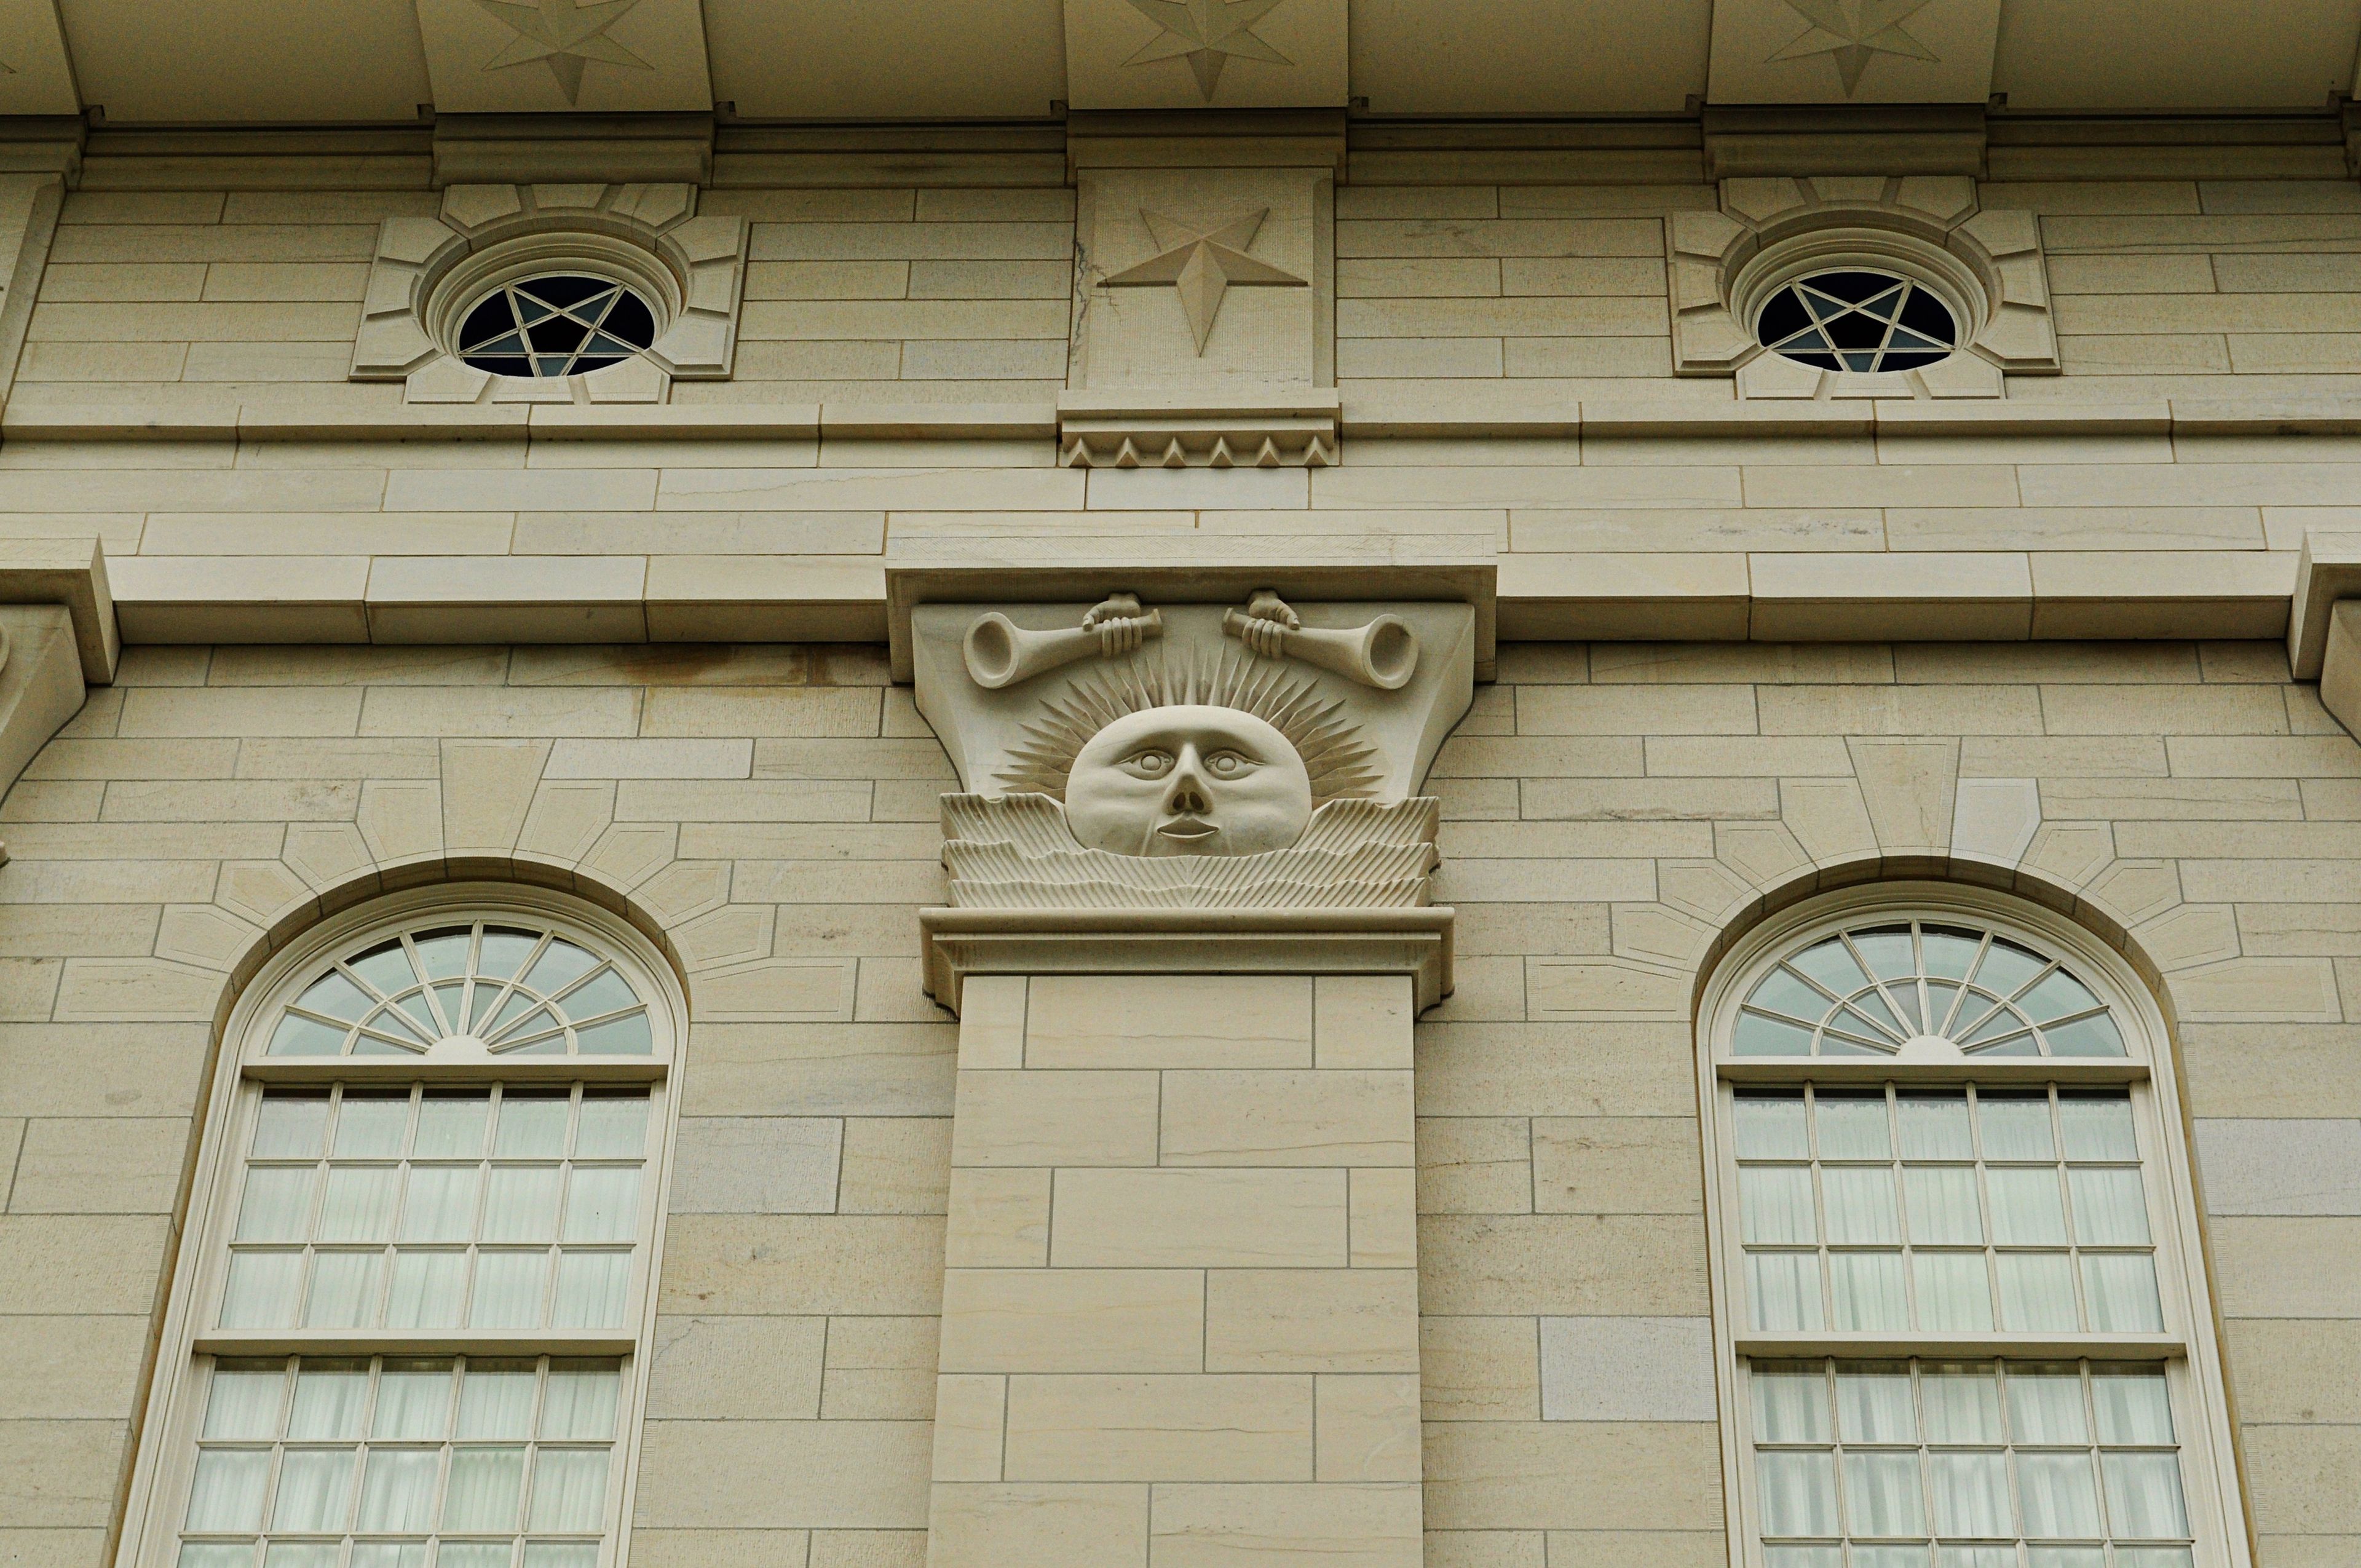 The Nauvoo Illinois Temple exterior view, including windows and symbols.